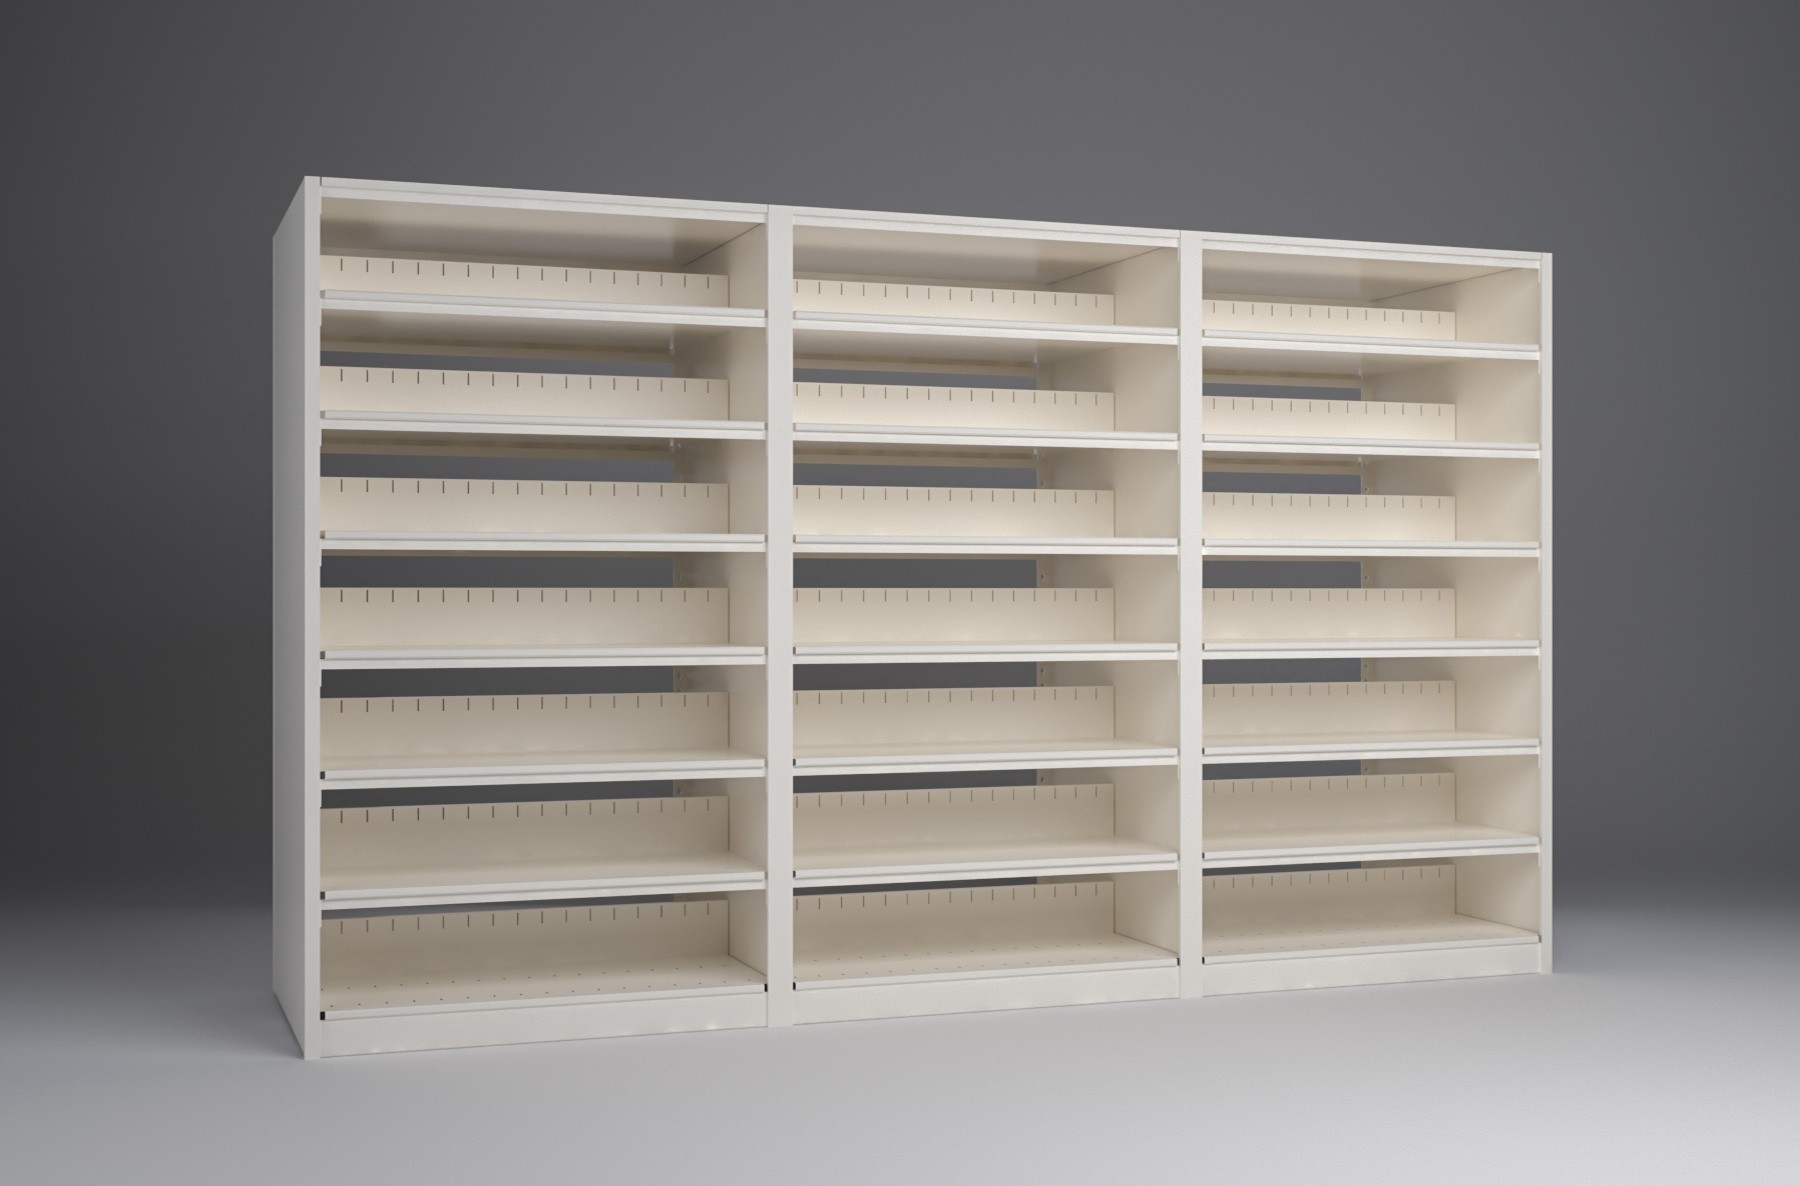 Legal-3 Unit-7 Tier-Double Sided 4 Post Shelving